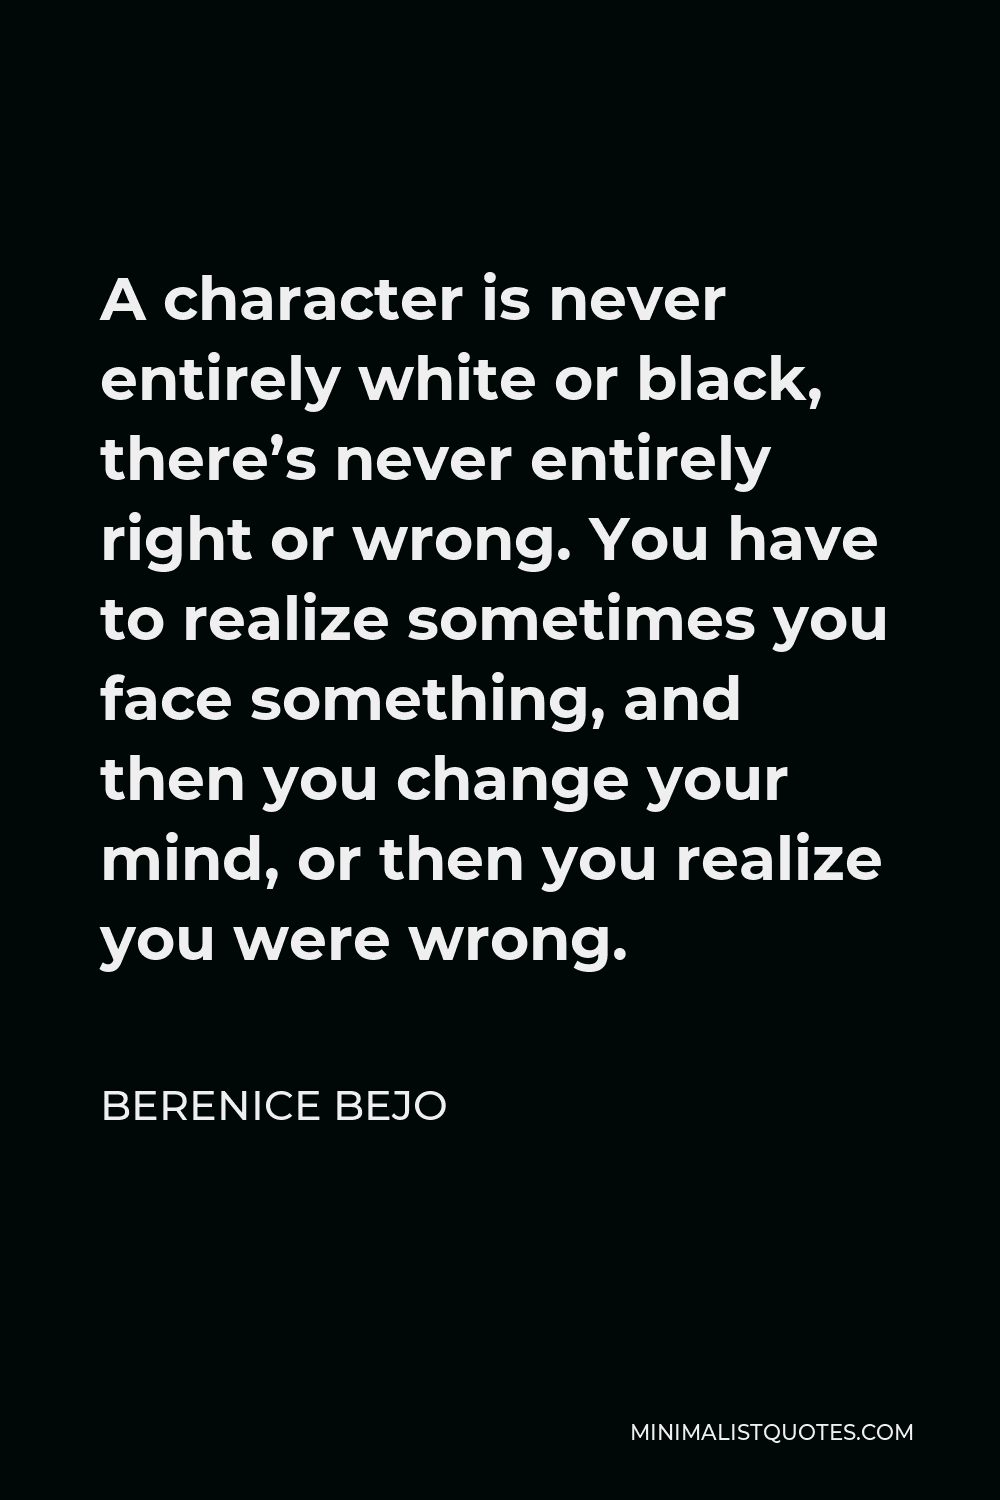 Berenice Bejo Quote - A character is never entirely white or black, there’s never entirely right or wrong. You have to realize sometimes you face something, and then you change your mind, or then you realize you were wrong.